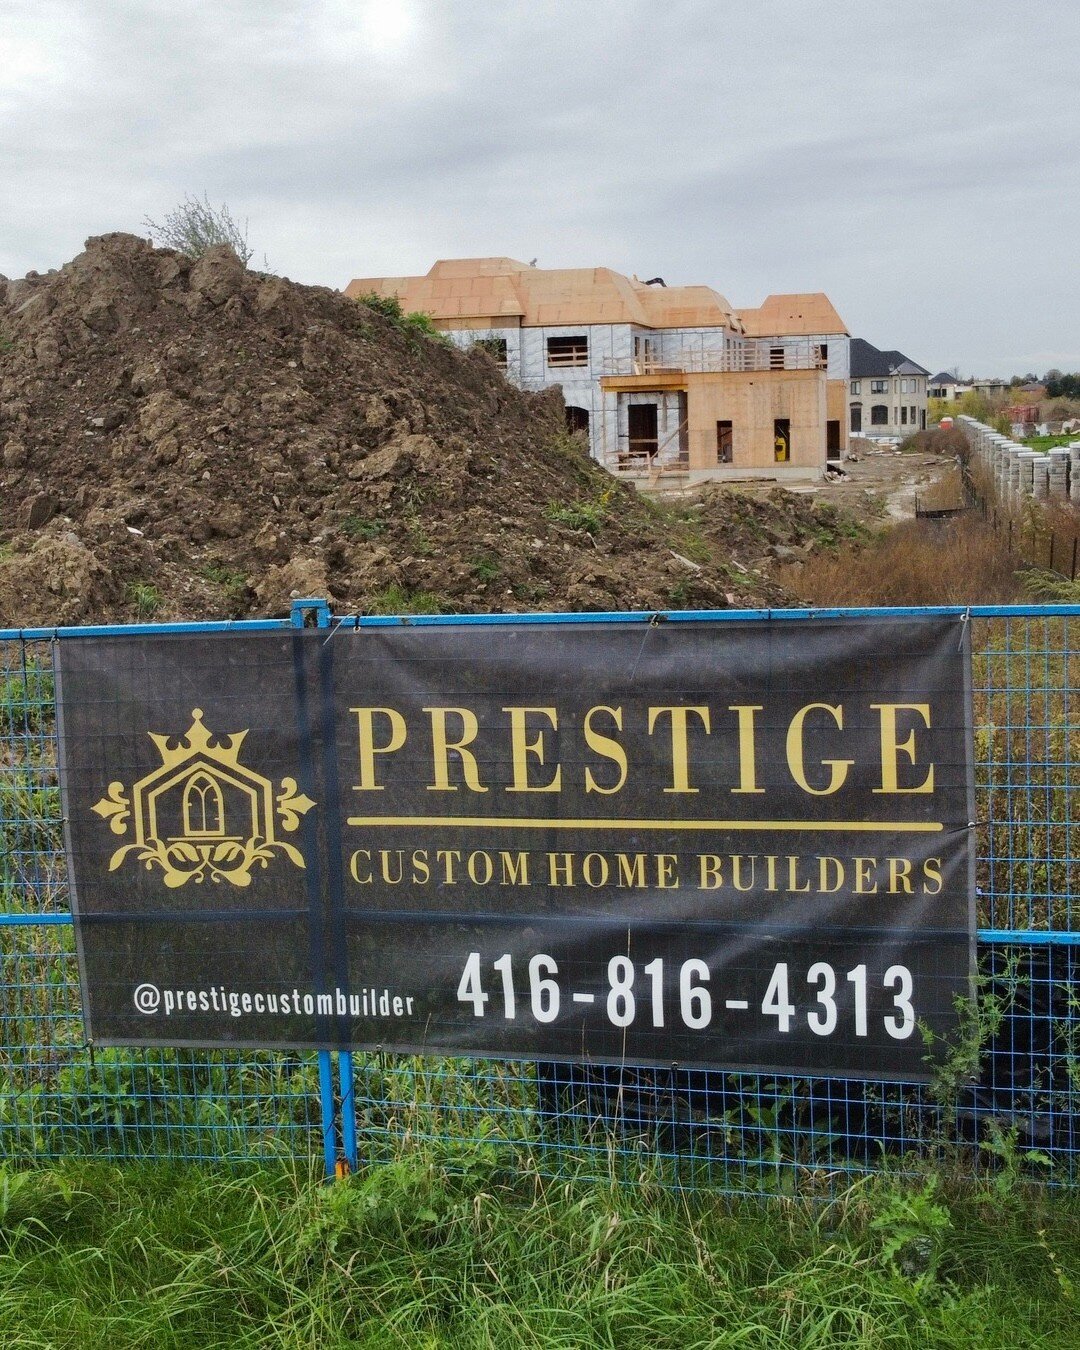 Whether it's building your dream home, renovating or adding major additions to your current home, Prestige is here to provide expert advice, get you connected with the right professionals within the industry and also, provide a peace of mind througho